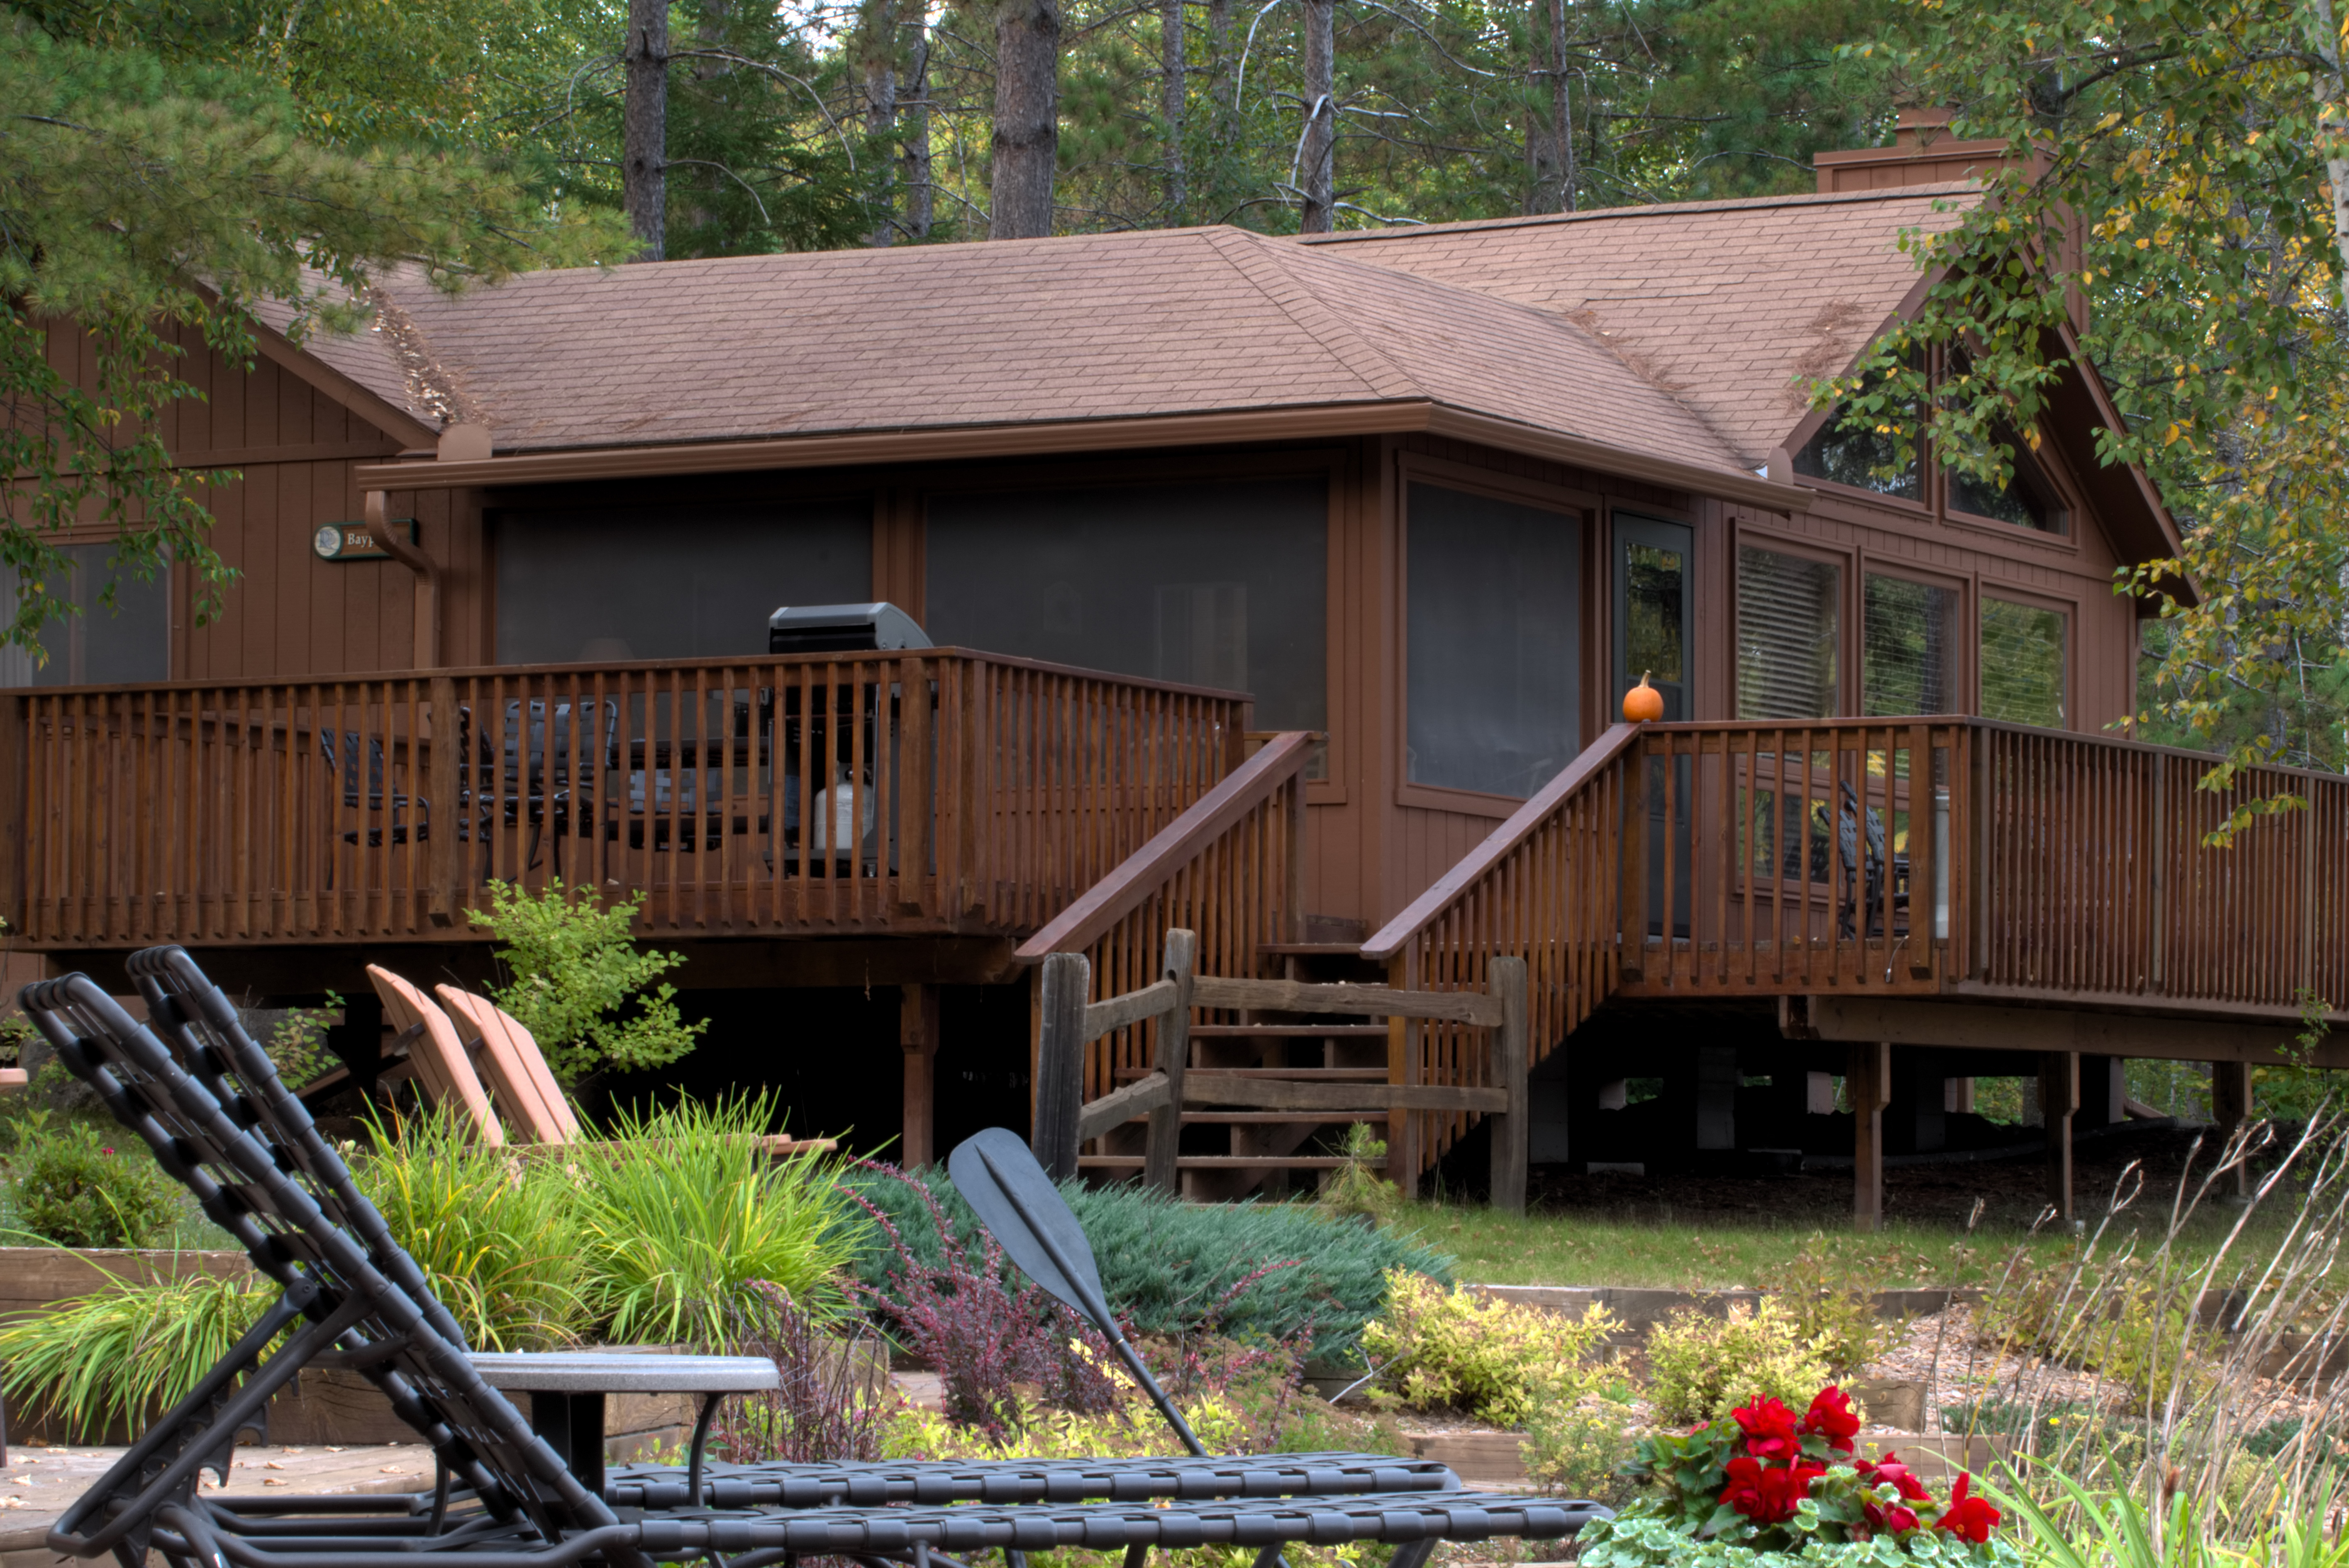 Ely Minnesota resort availability at River Point Resort & Outfitting Co. on Birch Lake and South Kawishiwi River - Bayport Vacation Home Cabin